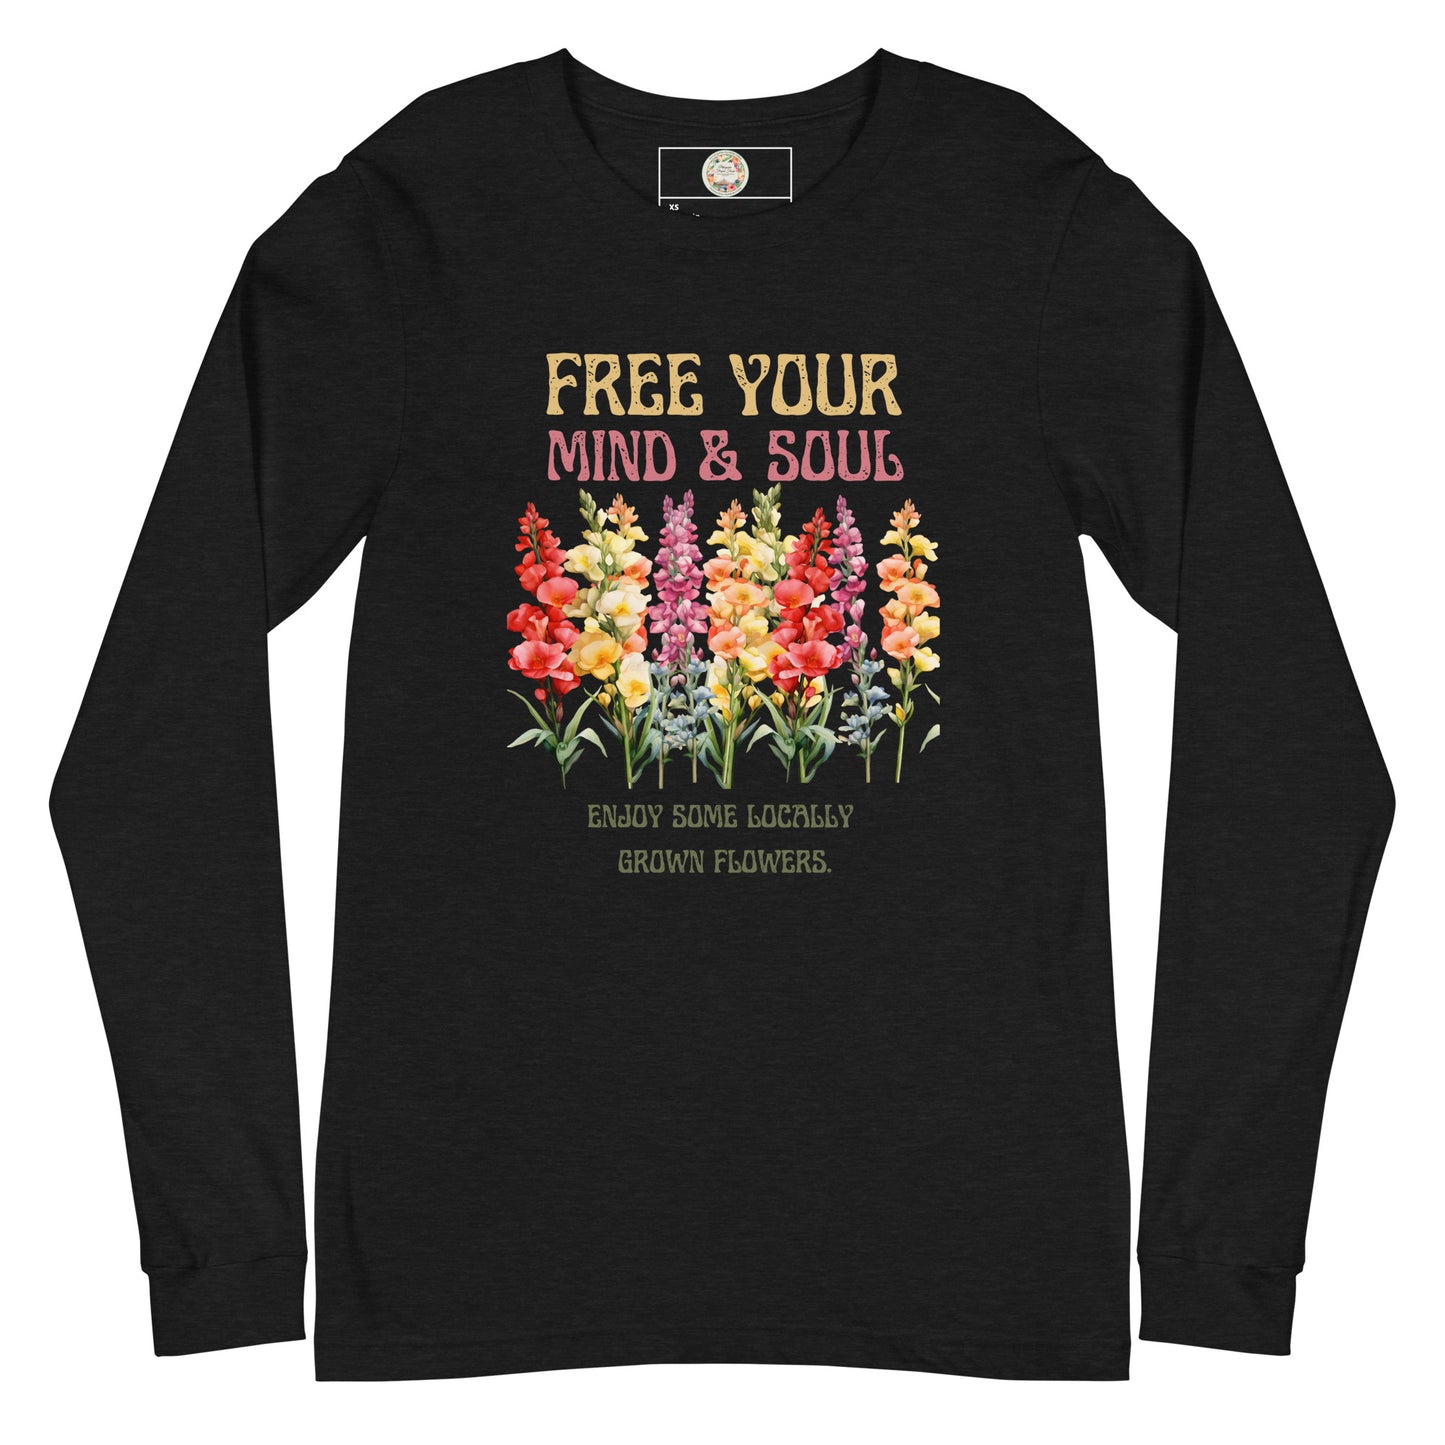 "Sweet Foral Tee's" Free Your Mind & Soul - Unisex Long Sleeve Tee